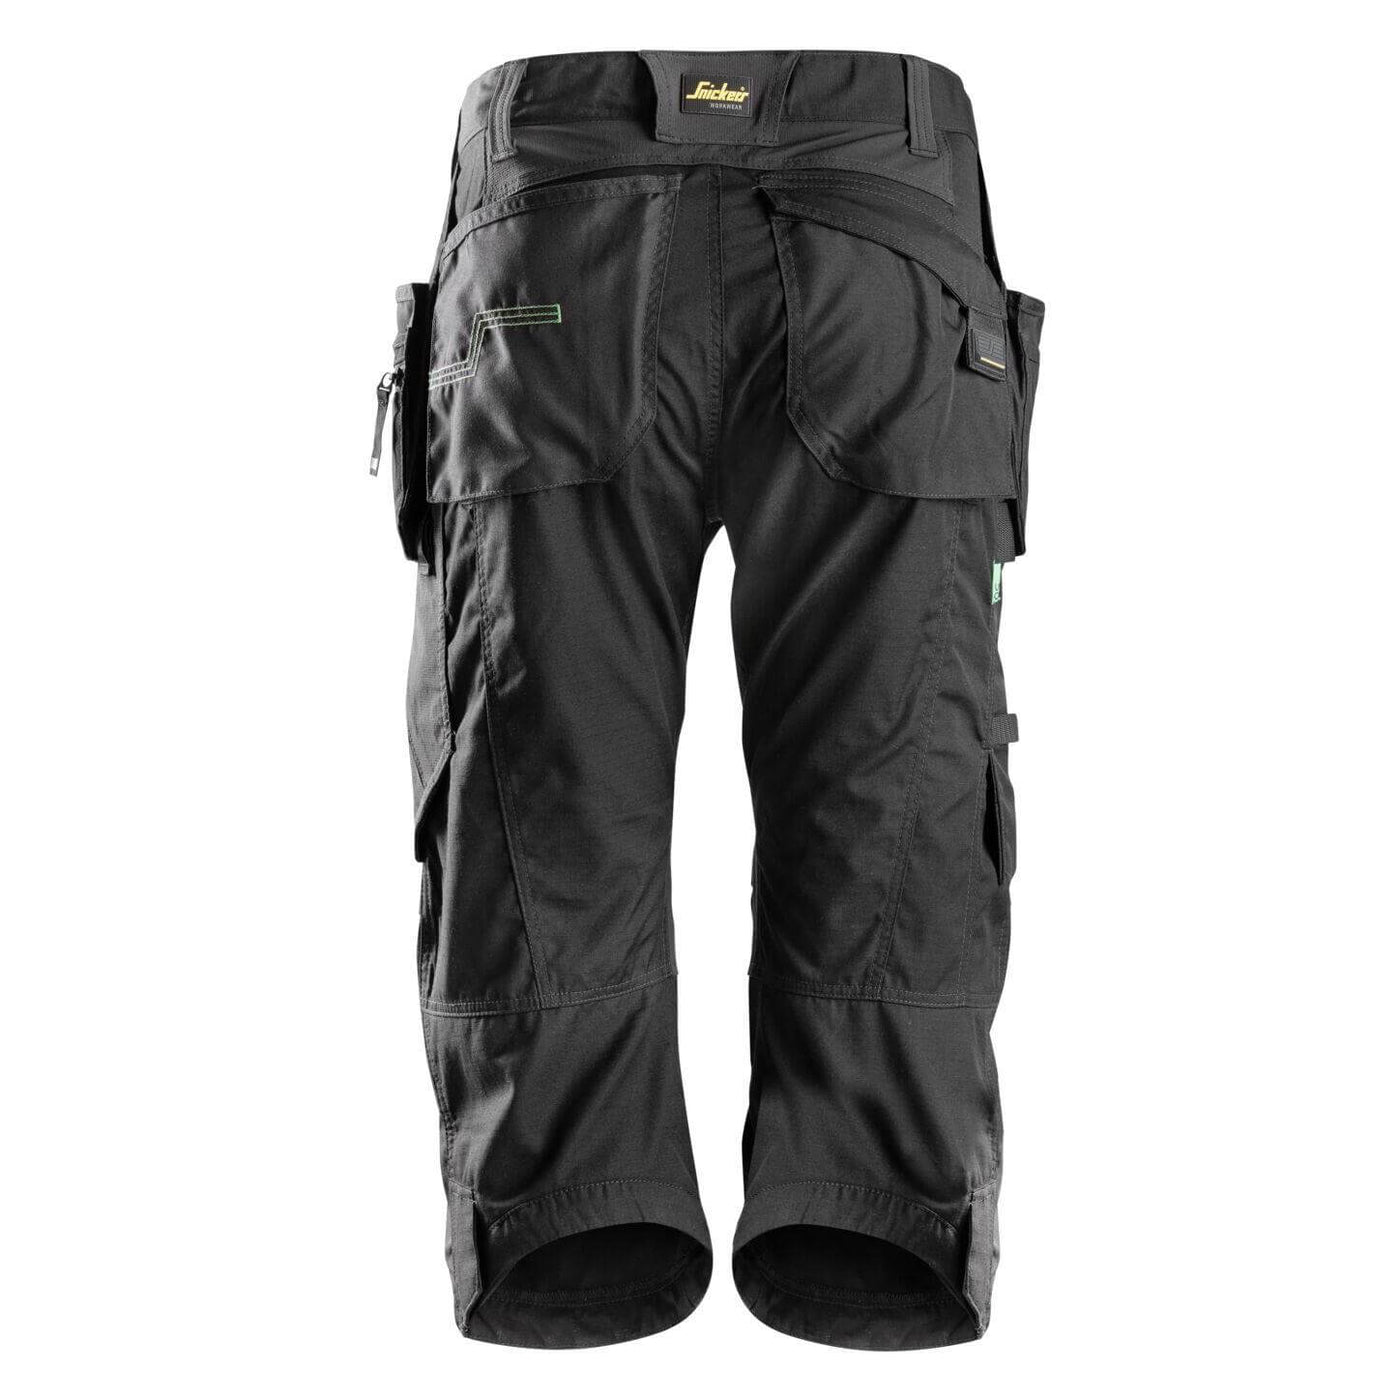 Snickers 6905 FlexiWork Lightweight Work Pirate Trousers with Holster Pockets Black Black back #colour_black-black